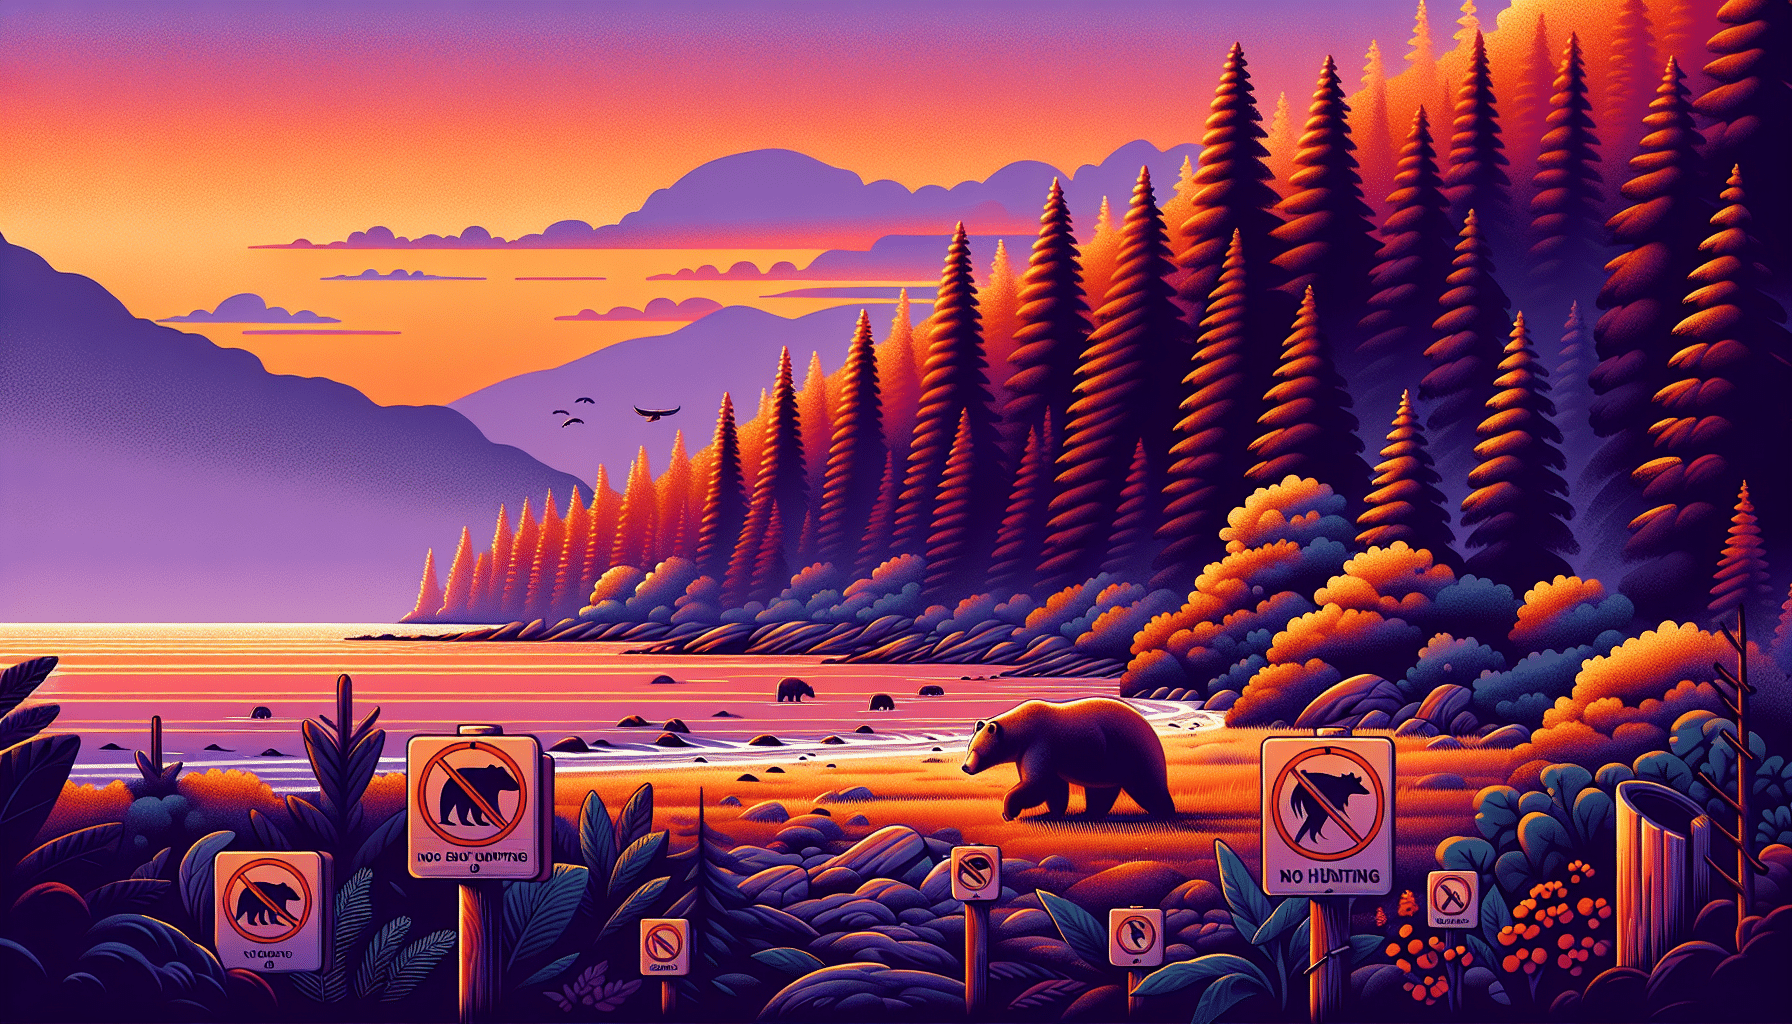 Depict a pristine Pacific coastal landscape at sunset, colored by rich hues of oranges and purples. Near the forest edge, a grizzly bear can be seen exploring for food. Nearby, scattered symbolically, are non-branded signs indicating no hunting, ensuring the bears’ safety. The environment is beautifully serene, representing the protected nature of these majestic creatures. Please, focus extensively on the elements that encapsulate the vibe of 'protection and preservation' without people or text in the frame.